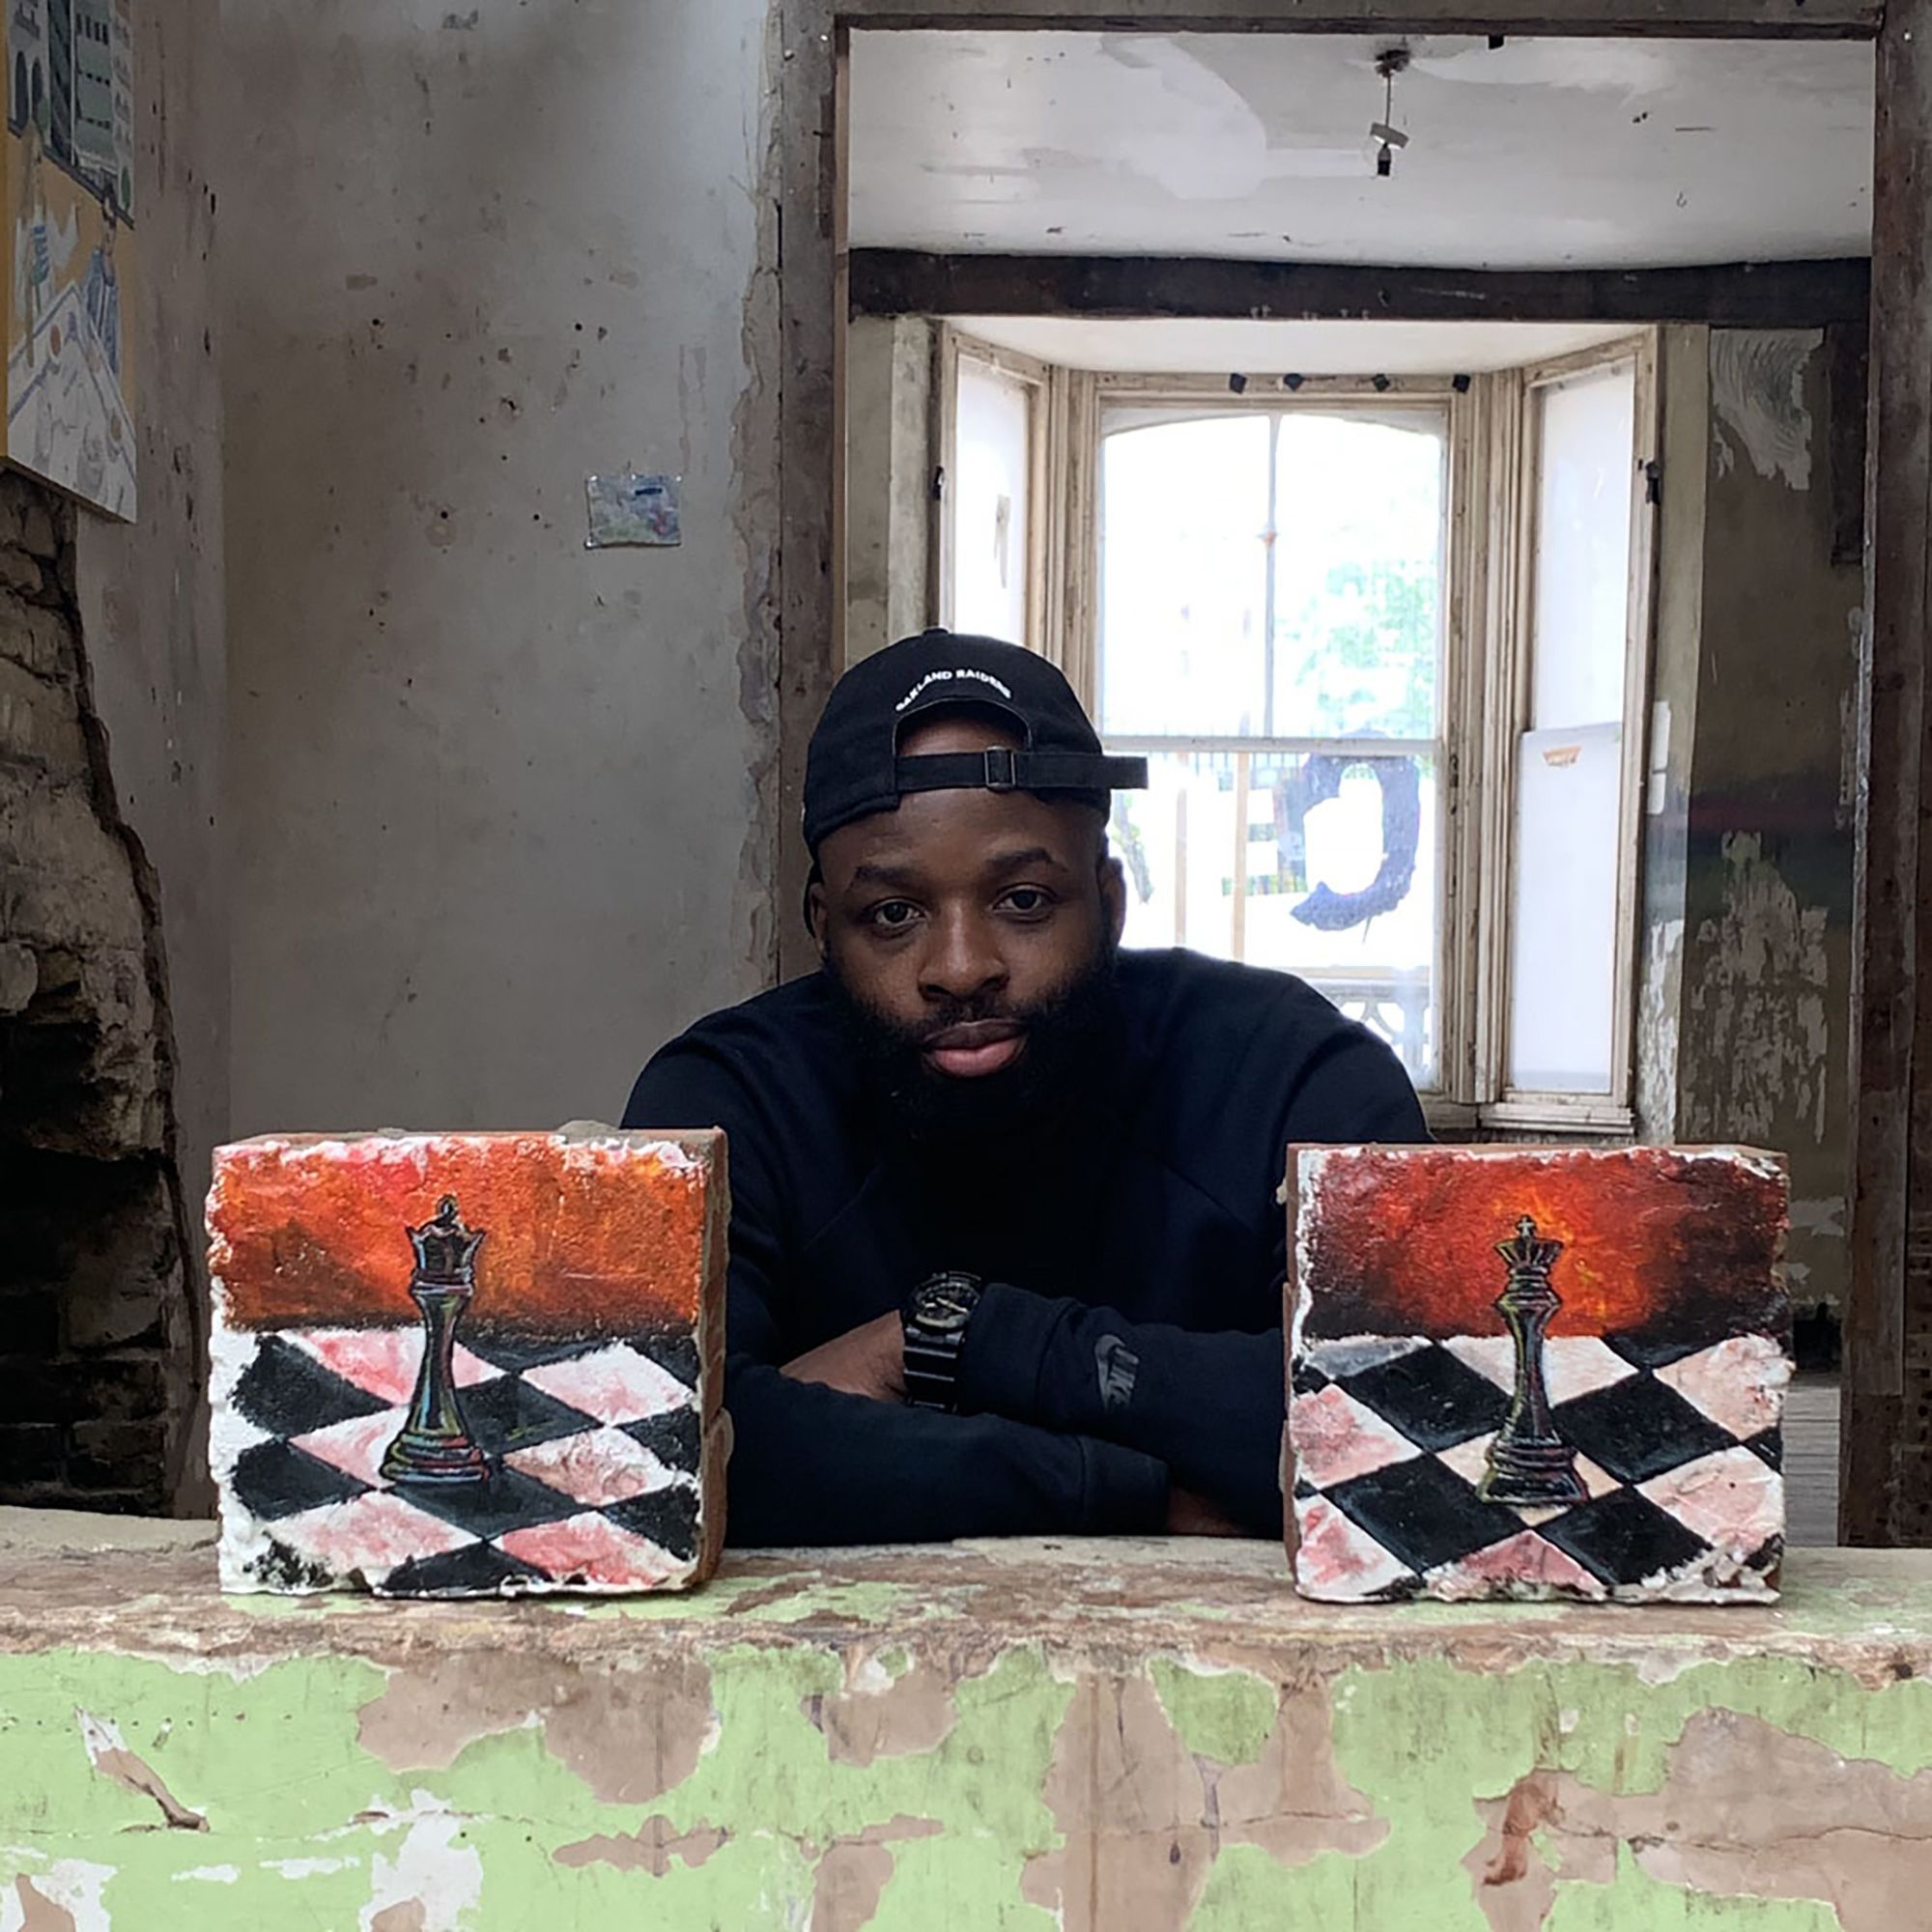 oseph, a black male, wearing all black clothing, wearing a backwards baseball cap is looking towards the camera, crossing his arms. He is positioned in between two of his artworks, paintings of chess pieces.  